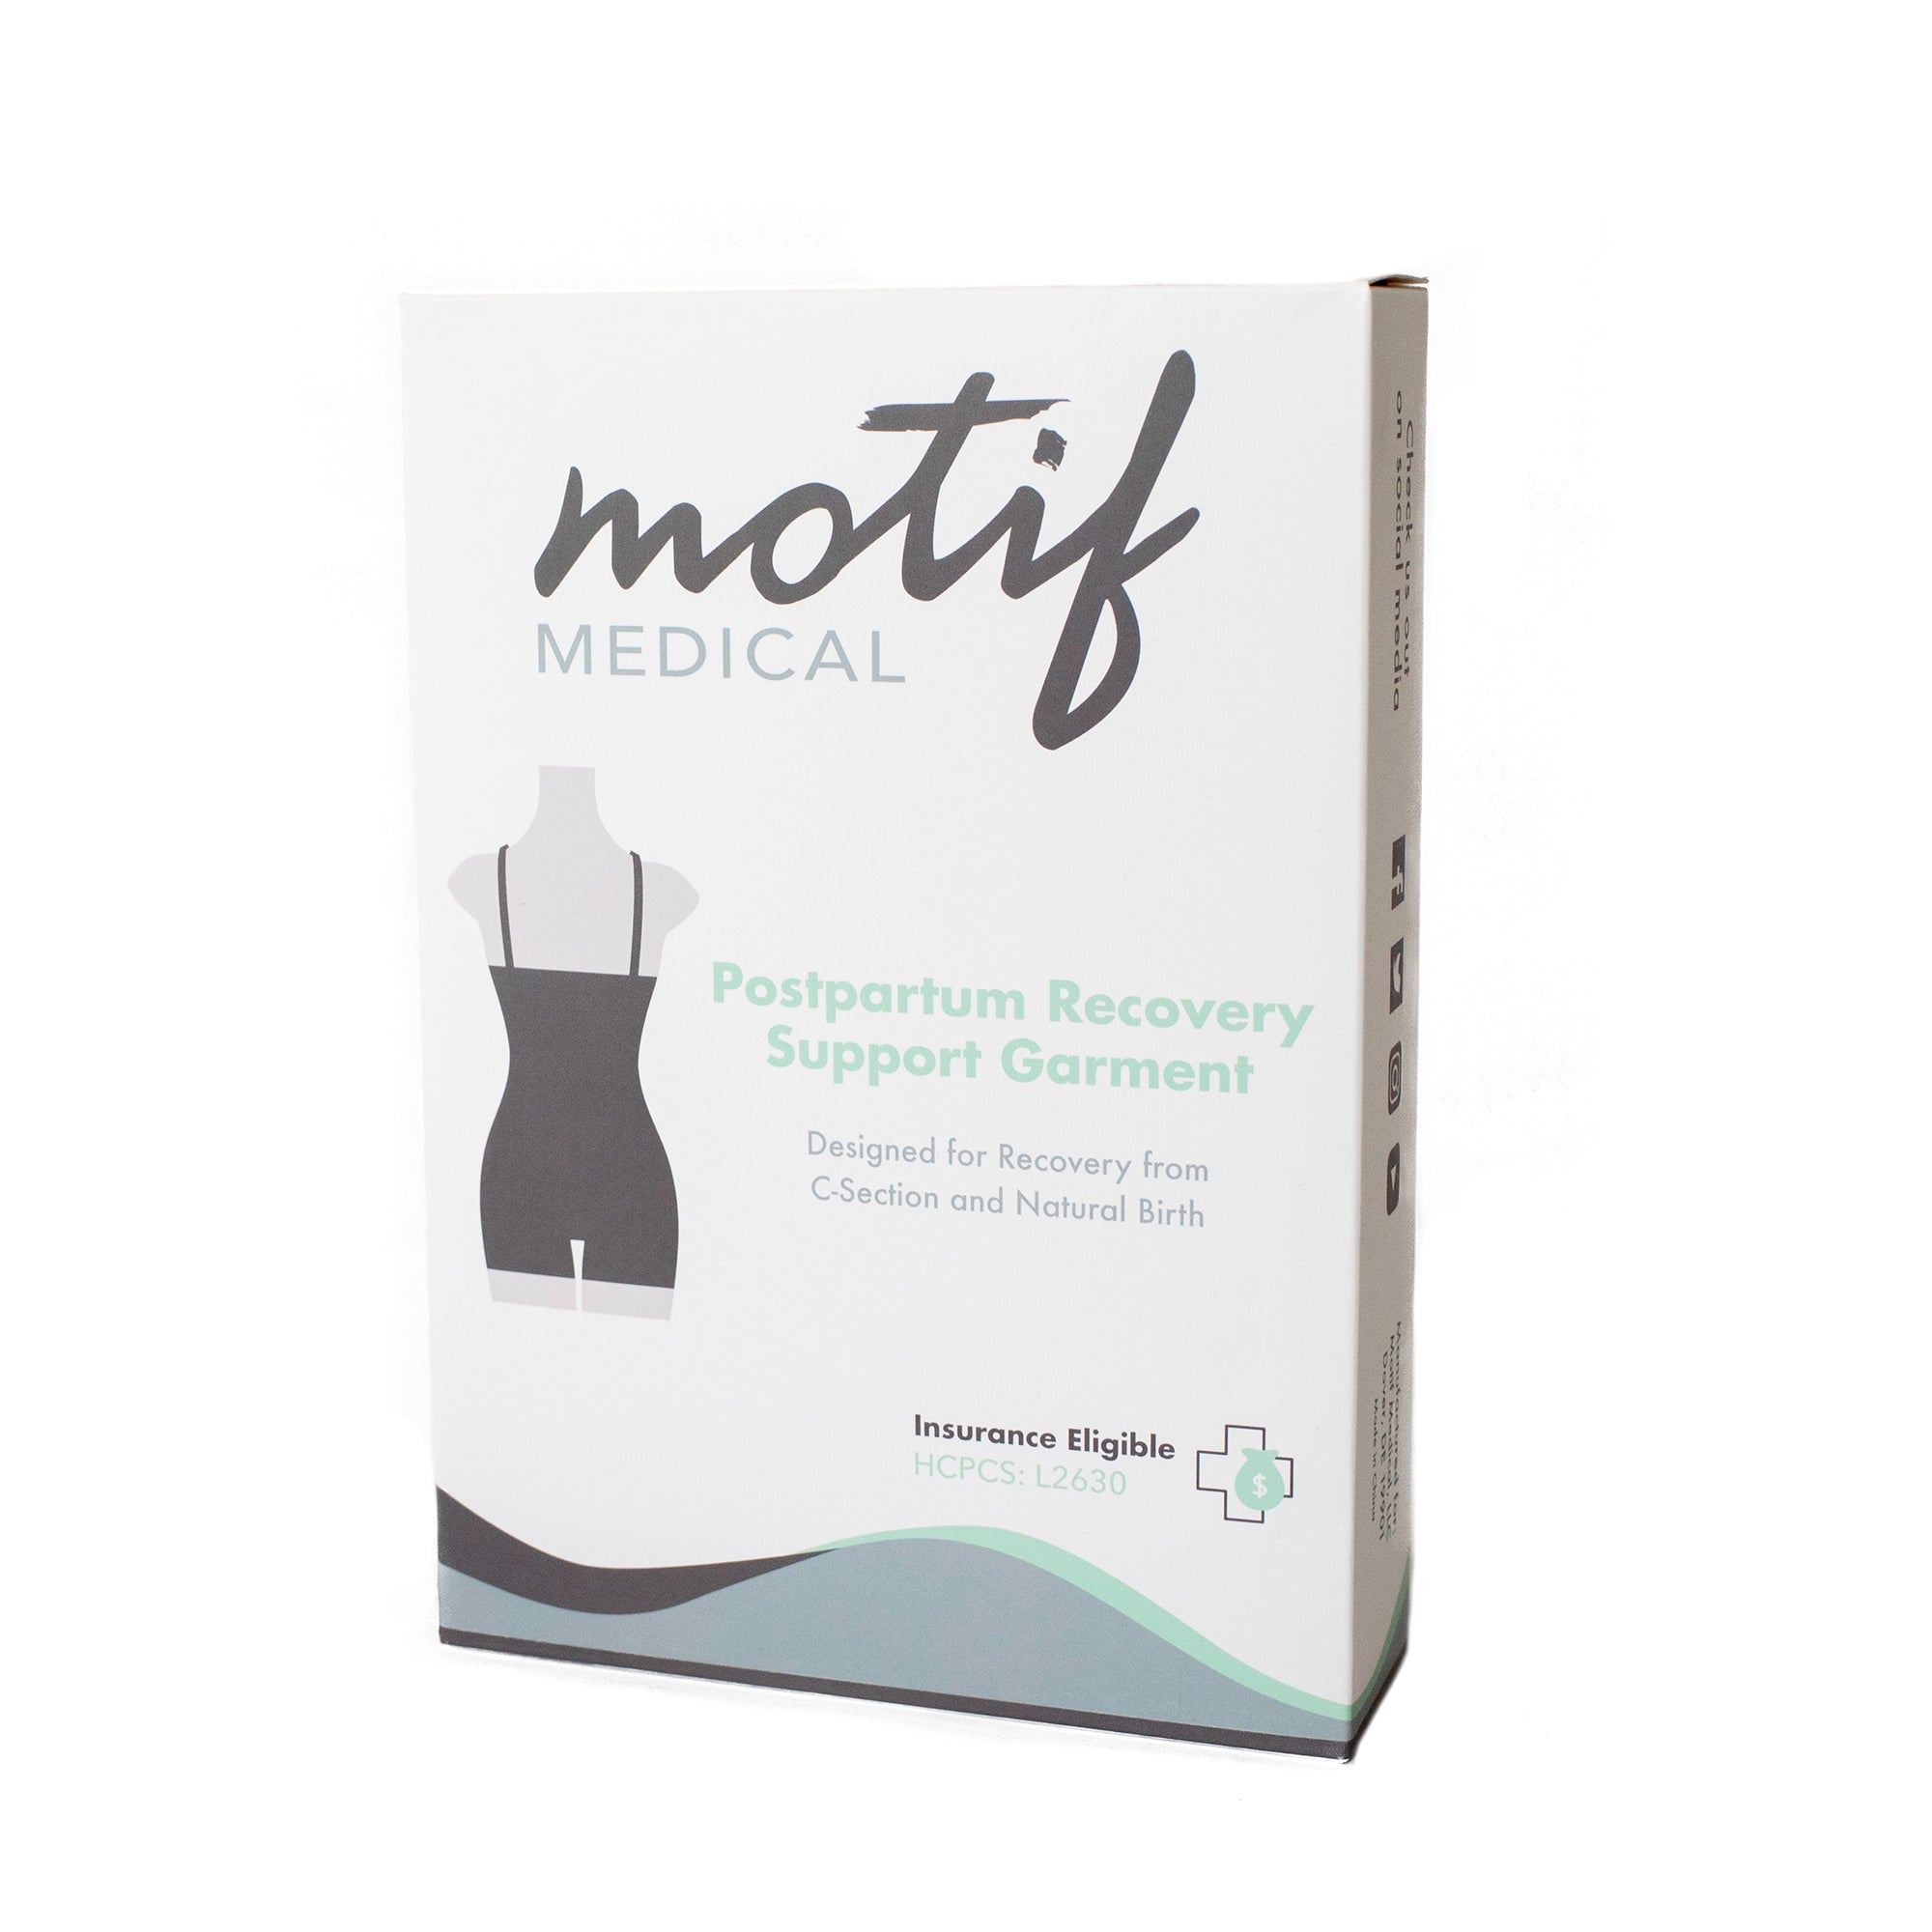 Motif Medical Postpartum Recovery Garment for C-Section and Natural Birth